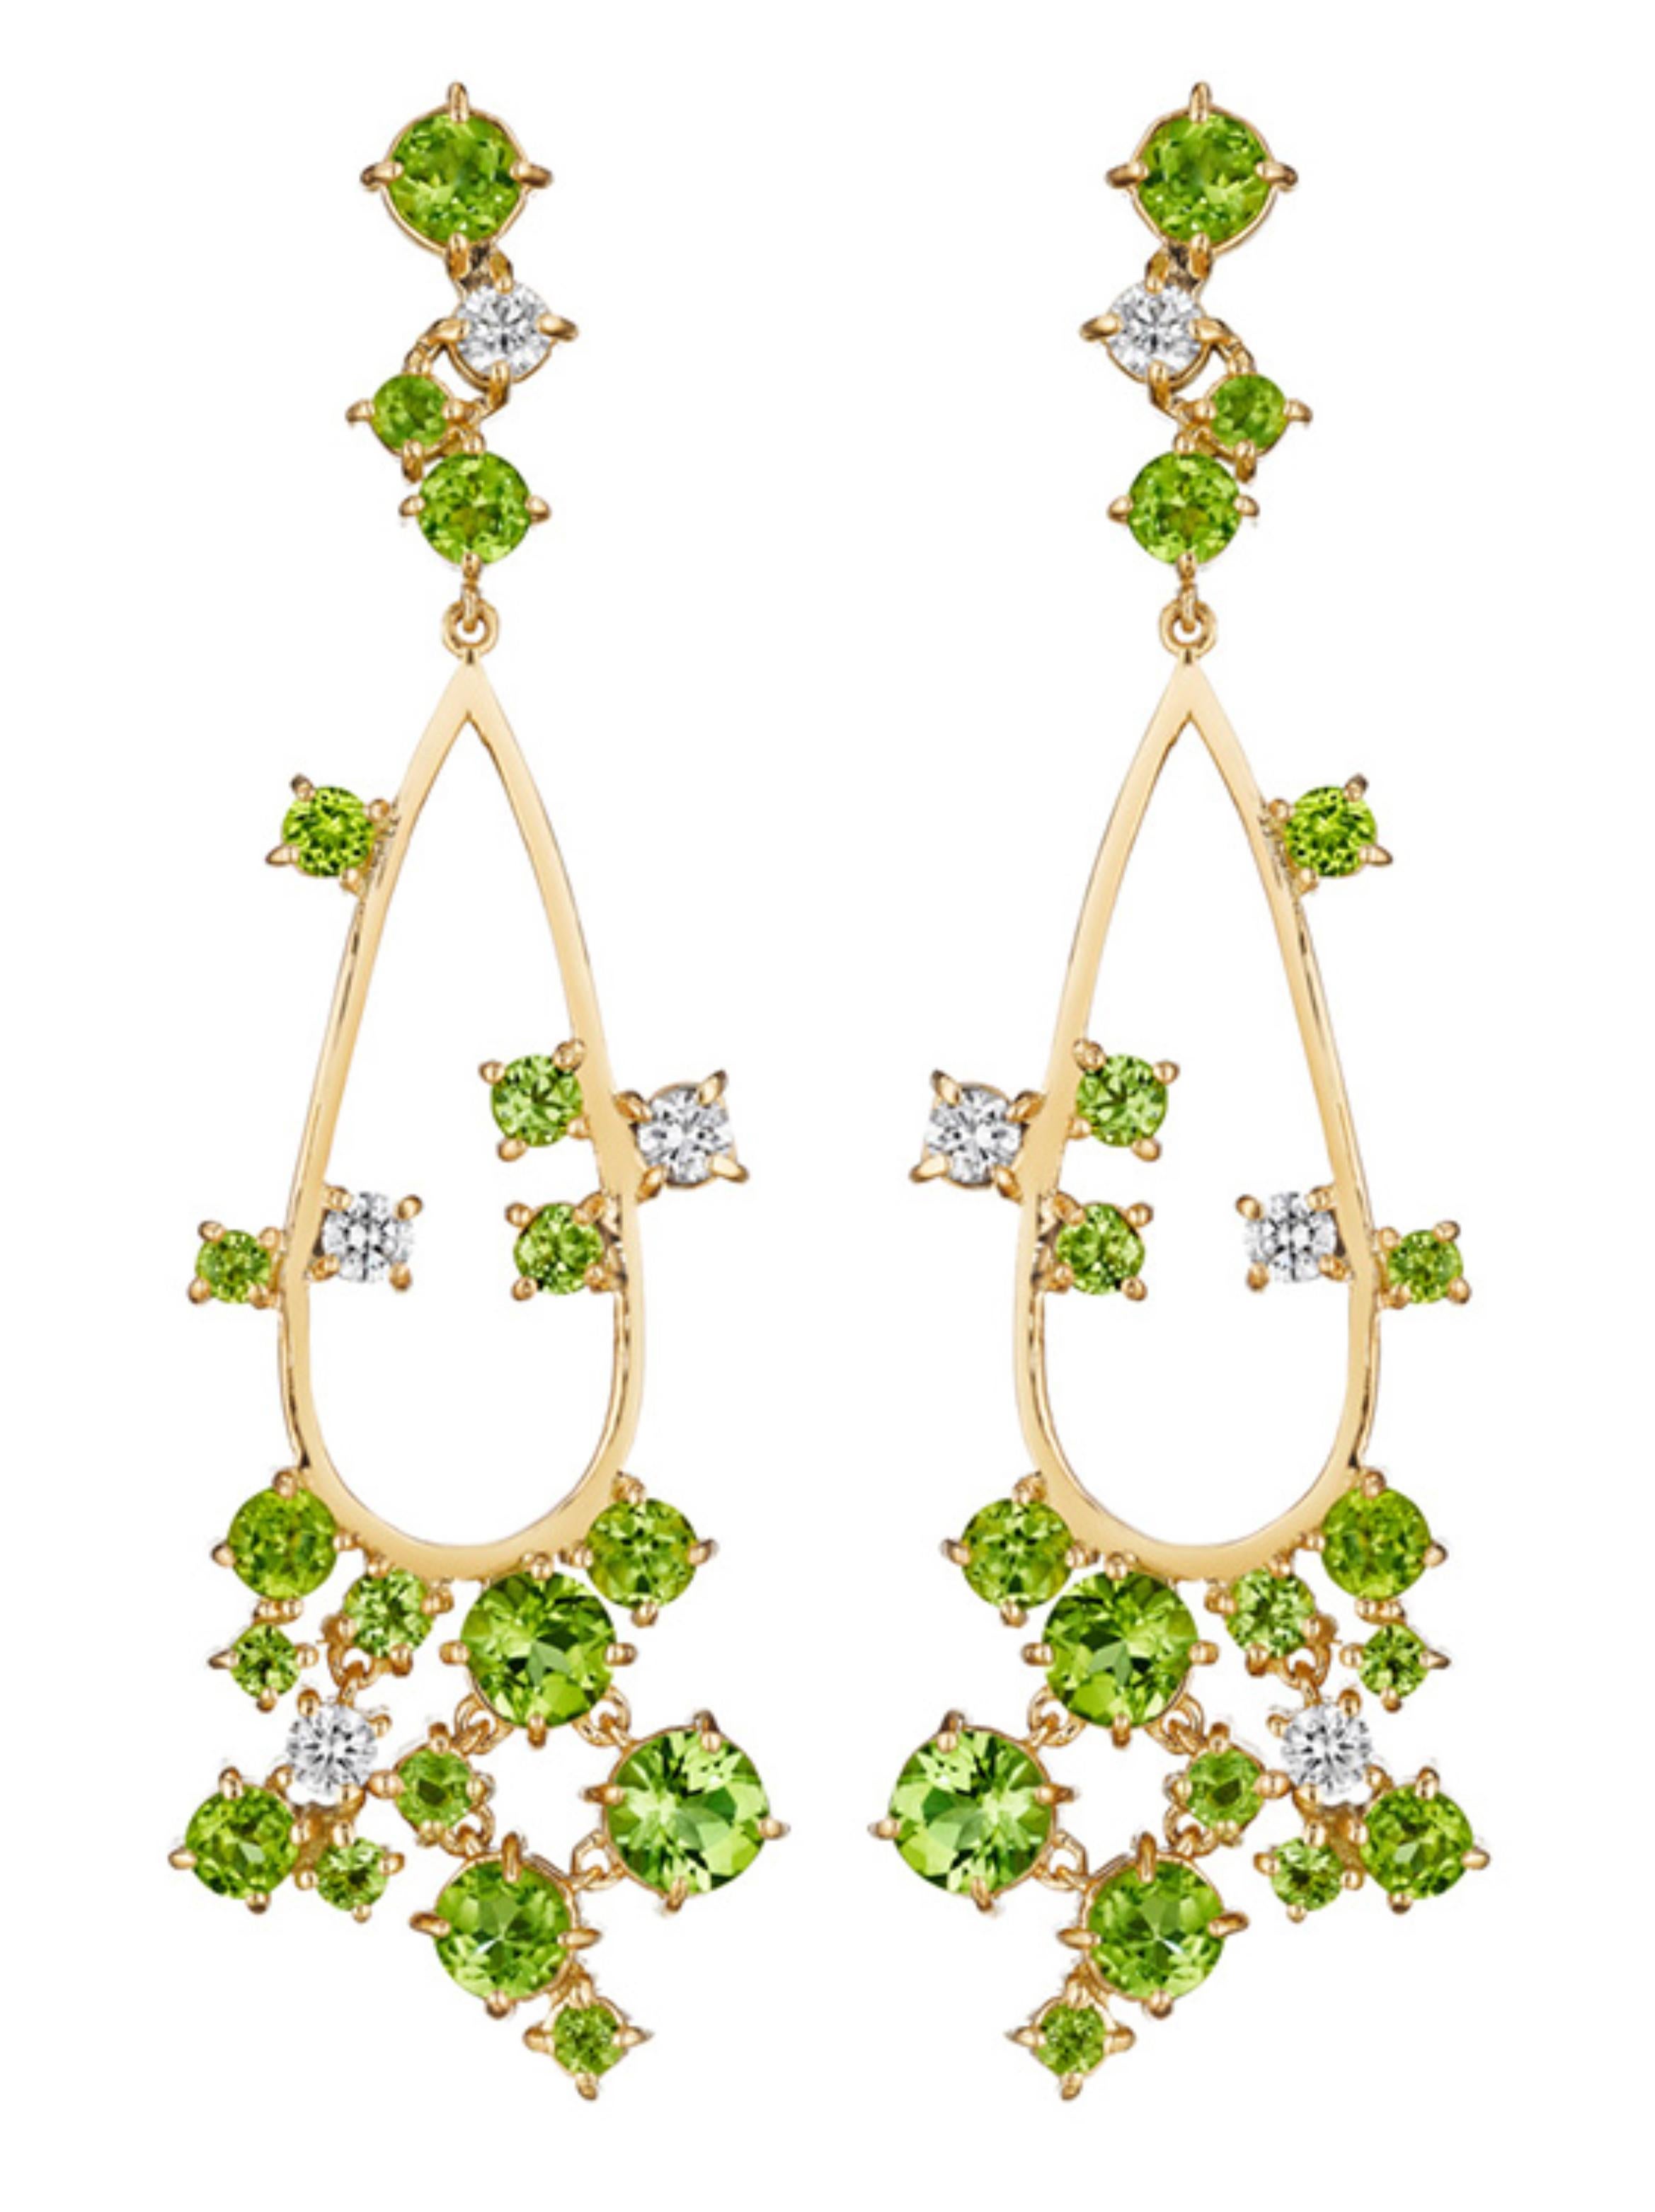 Artisan Melting Ice 18k Yellow Gold Peridot and Diamond Earrings by MadStone For Sale